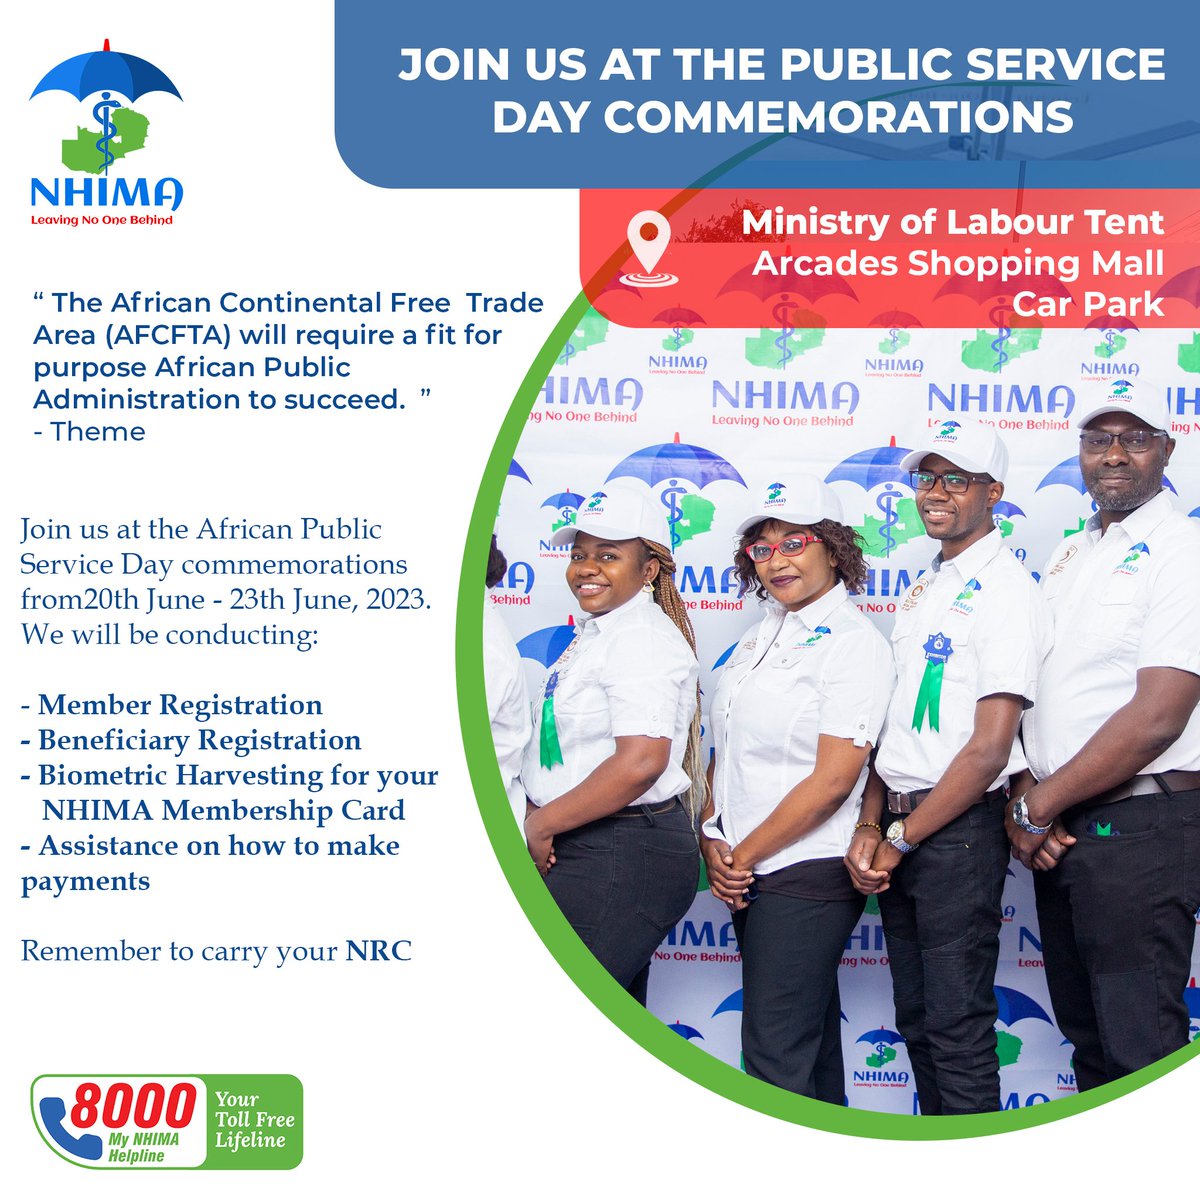 NHIMA will be participating in the African Public Service Day Commemorations at Arcades Shopping Mall. Join us for a range of services, including Member Registration, Beneficiary Registration, Biometric Harvesting for your NHIMA Membership Card, and